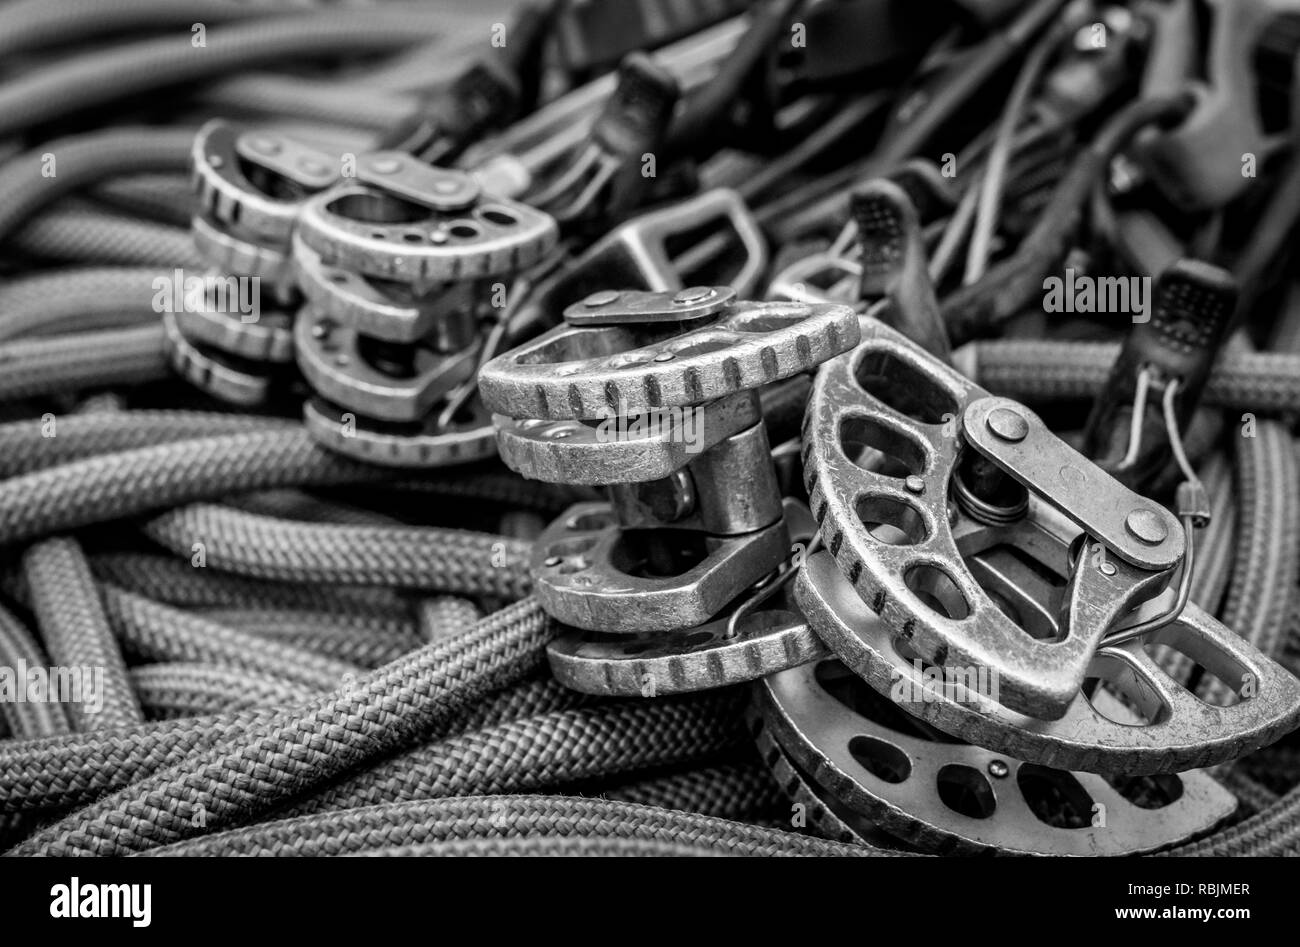 Traditional Rock Climbing Gear. Cams, Stoppers, Rope, Quickdraws, and shoes  Stock Photo - Alamy